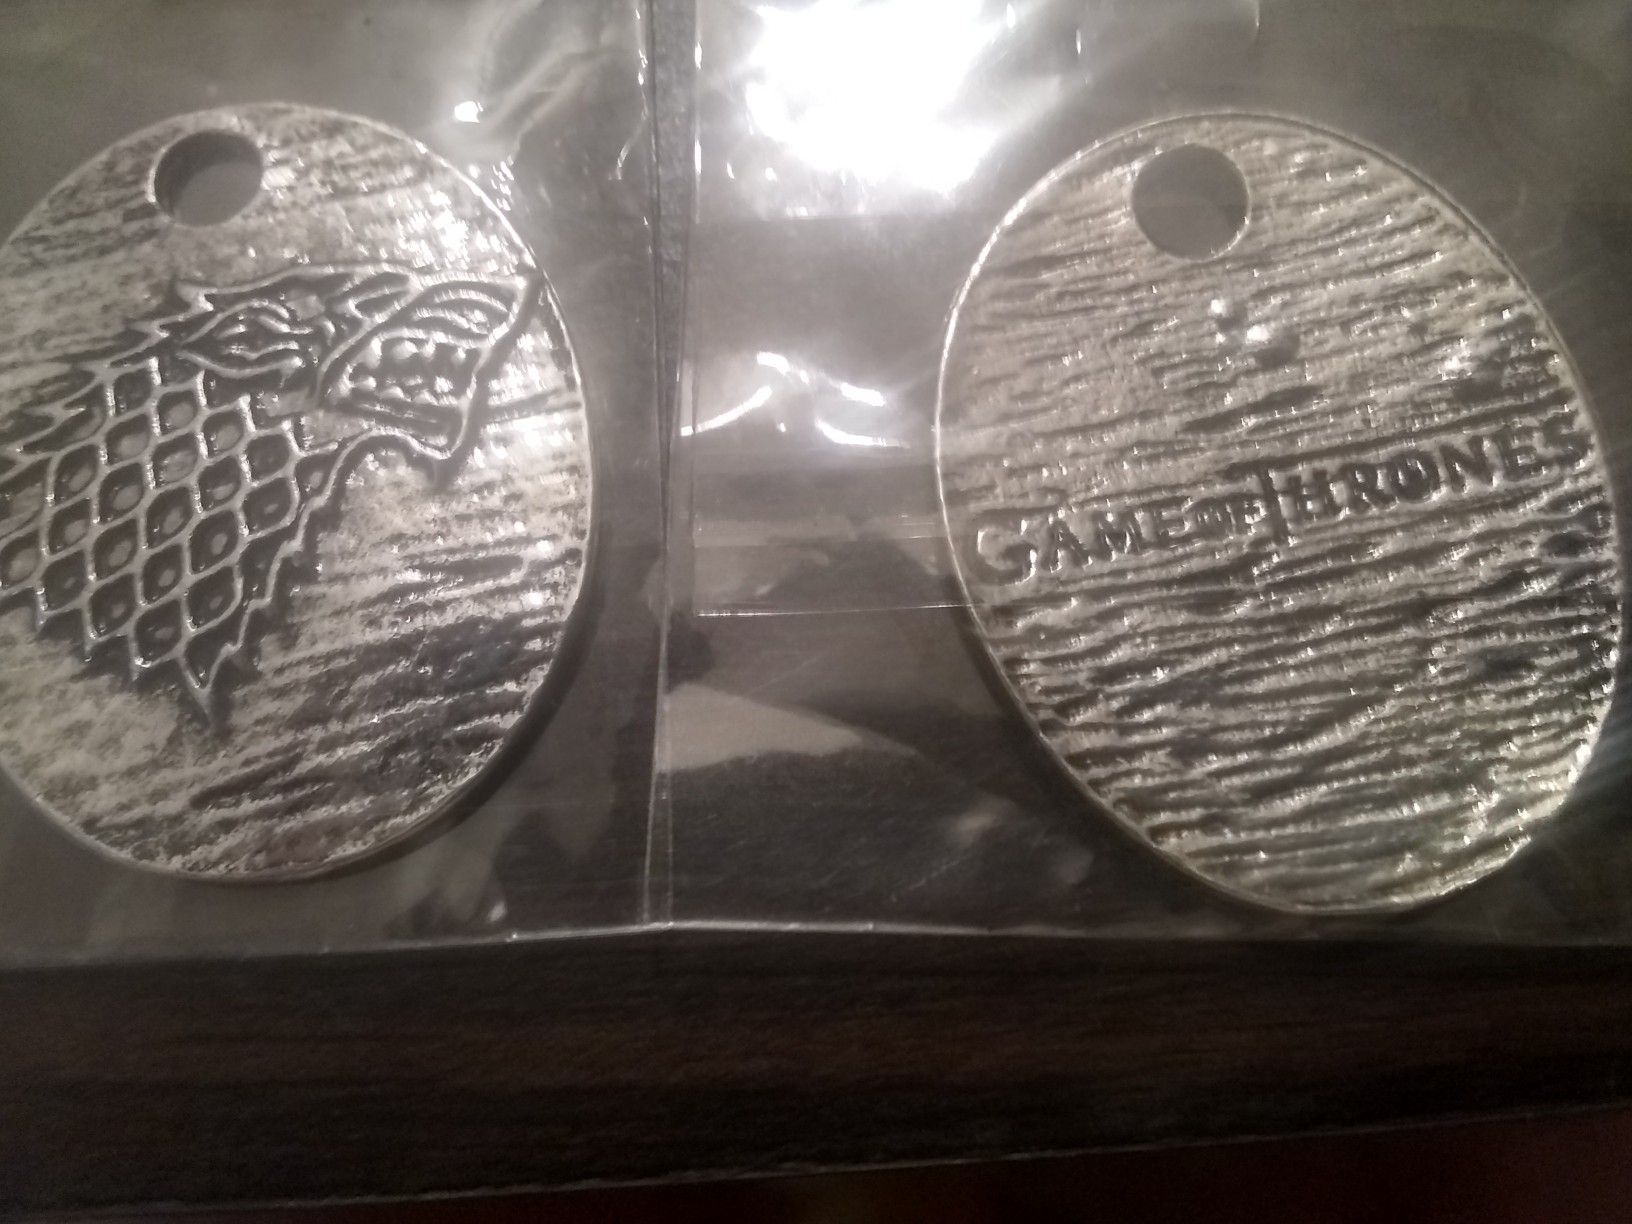 New game of thrones pendents $1 each